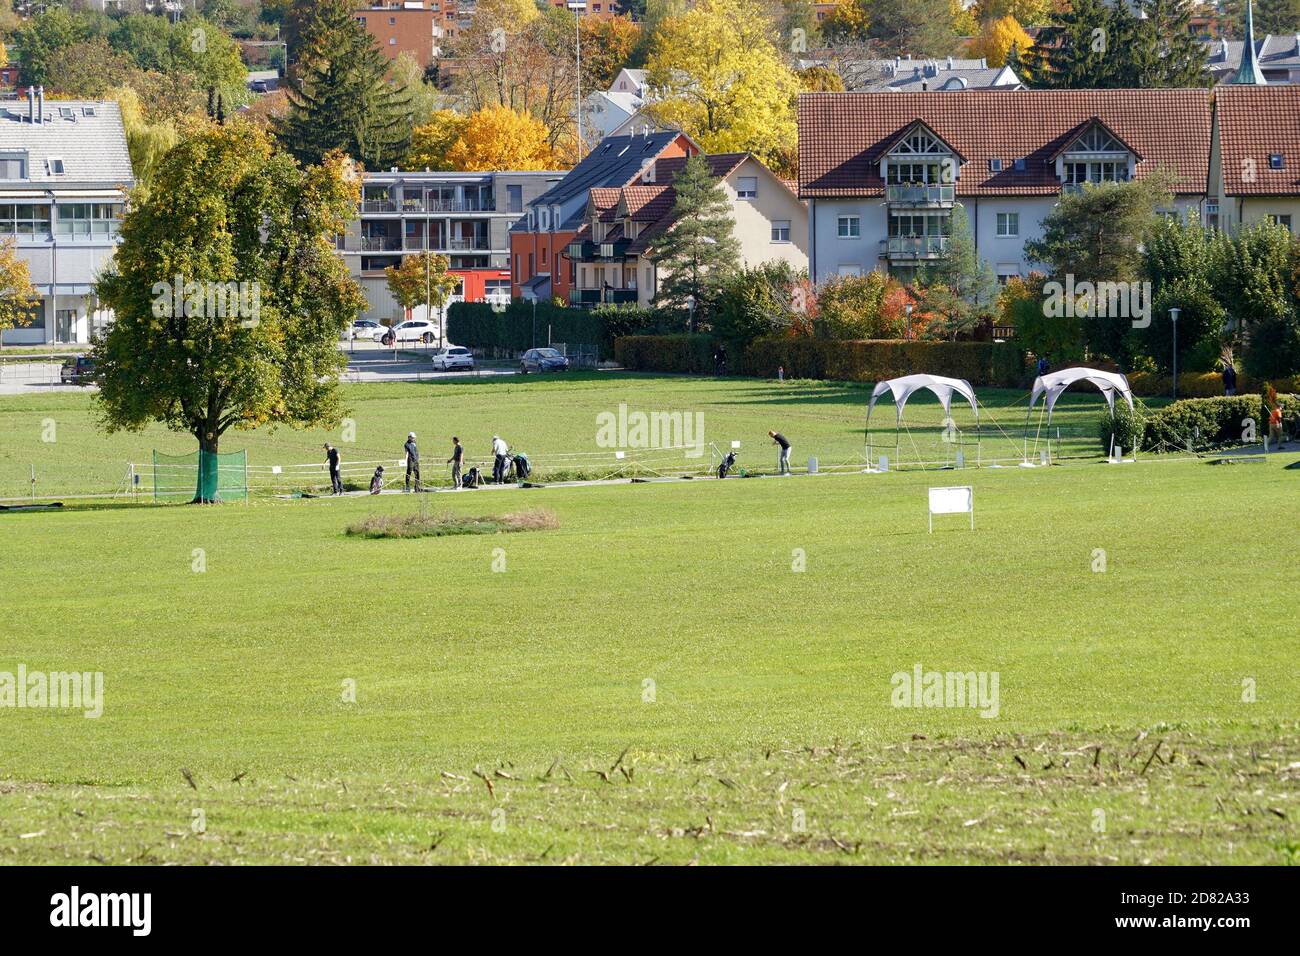 Golf club members in club Urdorf on a sunny autumn Saturday afternoon playing and practicing with village center in the background. Stock Photo